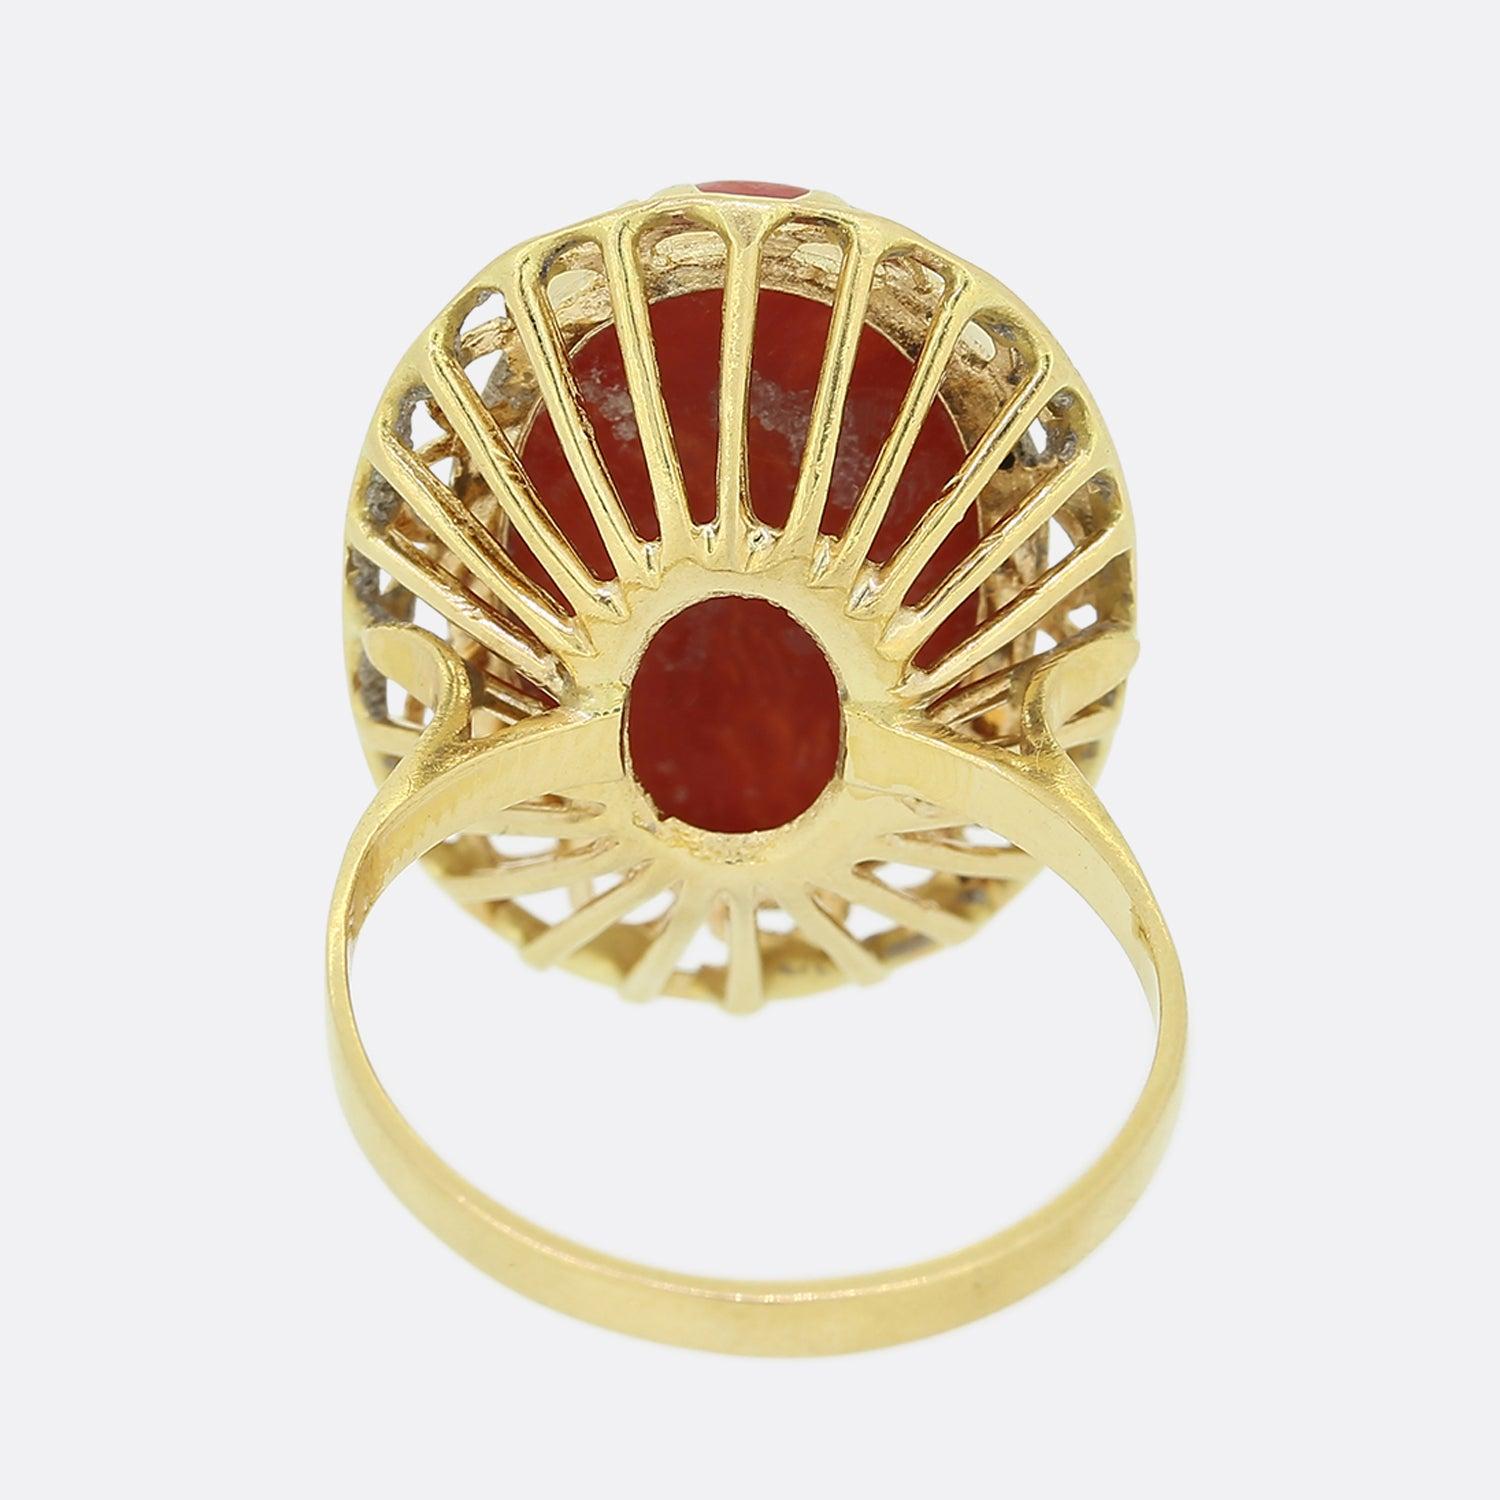 This is a vintage 18ct yellow gold coral cocktail ring. The central cabochon coral stone is a beautiful peach hue held in a bezel style mount.

Condition: Used (Very Good)
Weight: 6.9 grams
Size: N
Face Dimensions: 24mm x 18mm
Coral Dimensions: